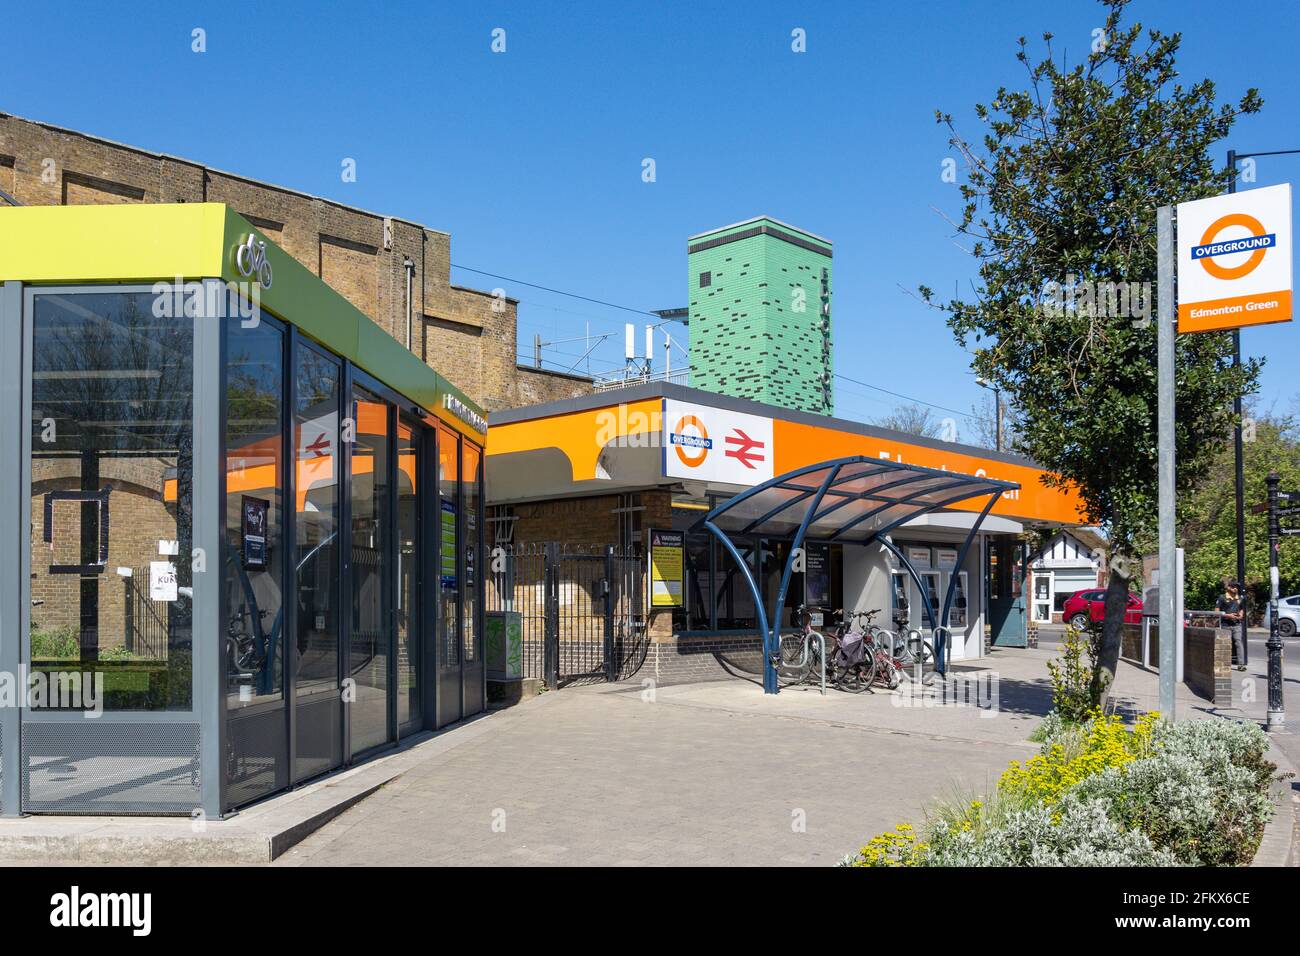 Edmonton Green Overground Station, The Broadway, Edmonton, London Borough of Enfield, Greater London, Angleterre, Royaume-Uni Banque D'Images